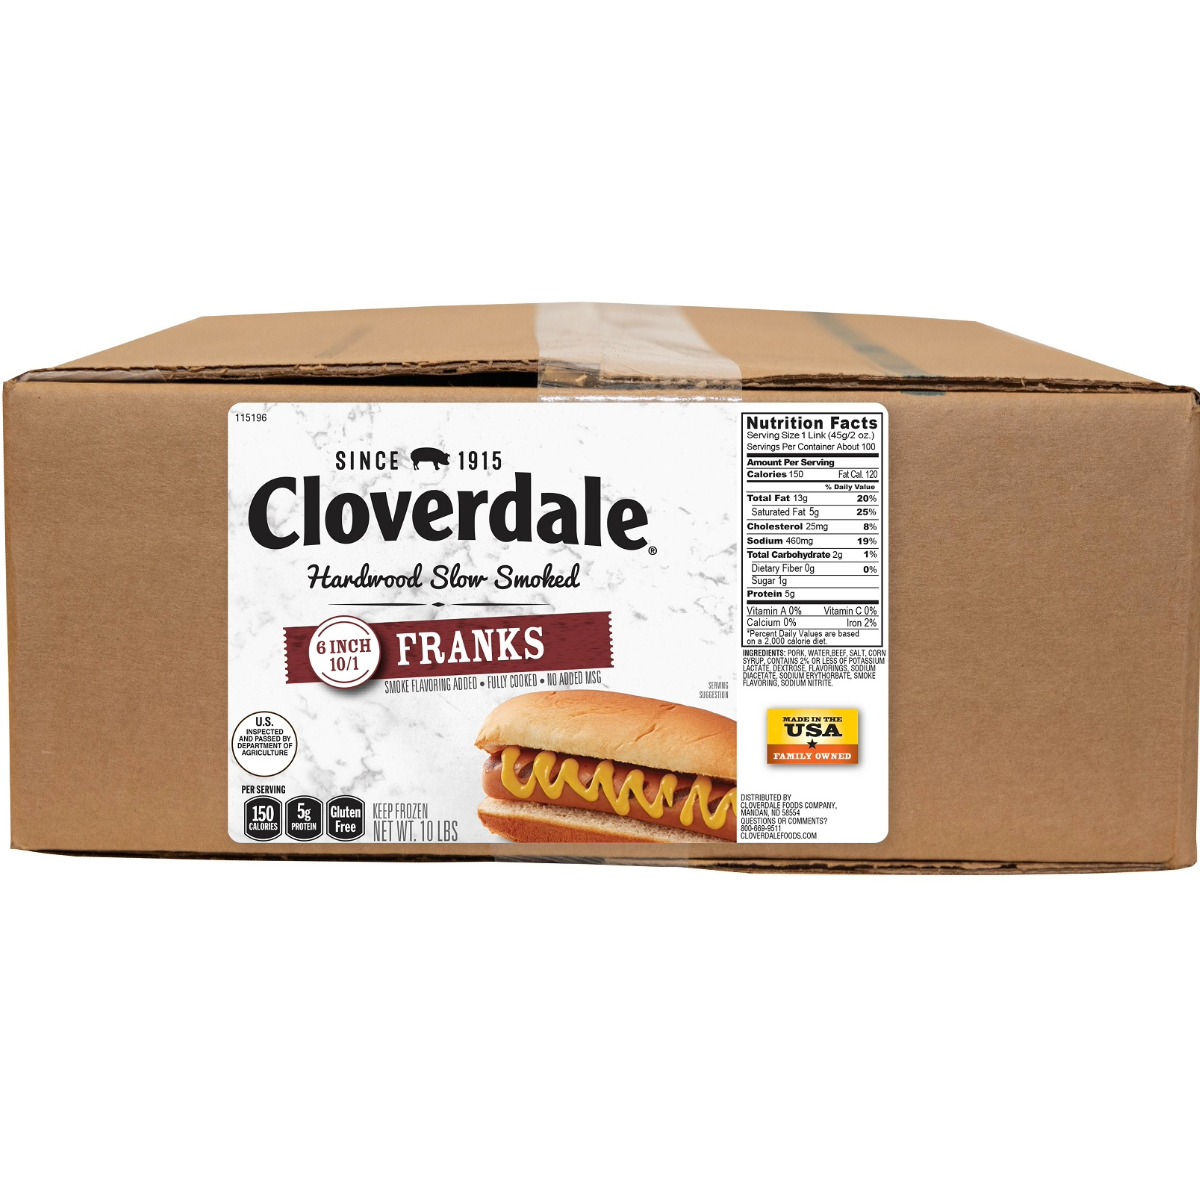 CLOVERDALE MEAT HOT DOGS 6 INCH 10/1 FRANKS